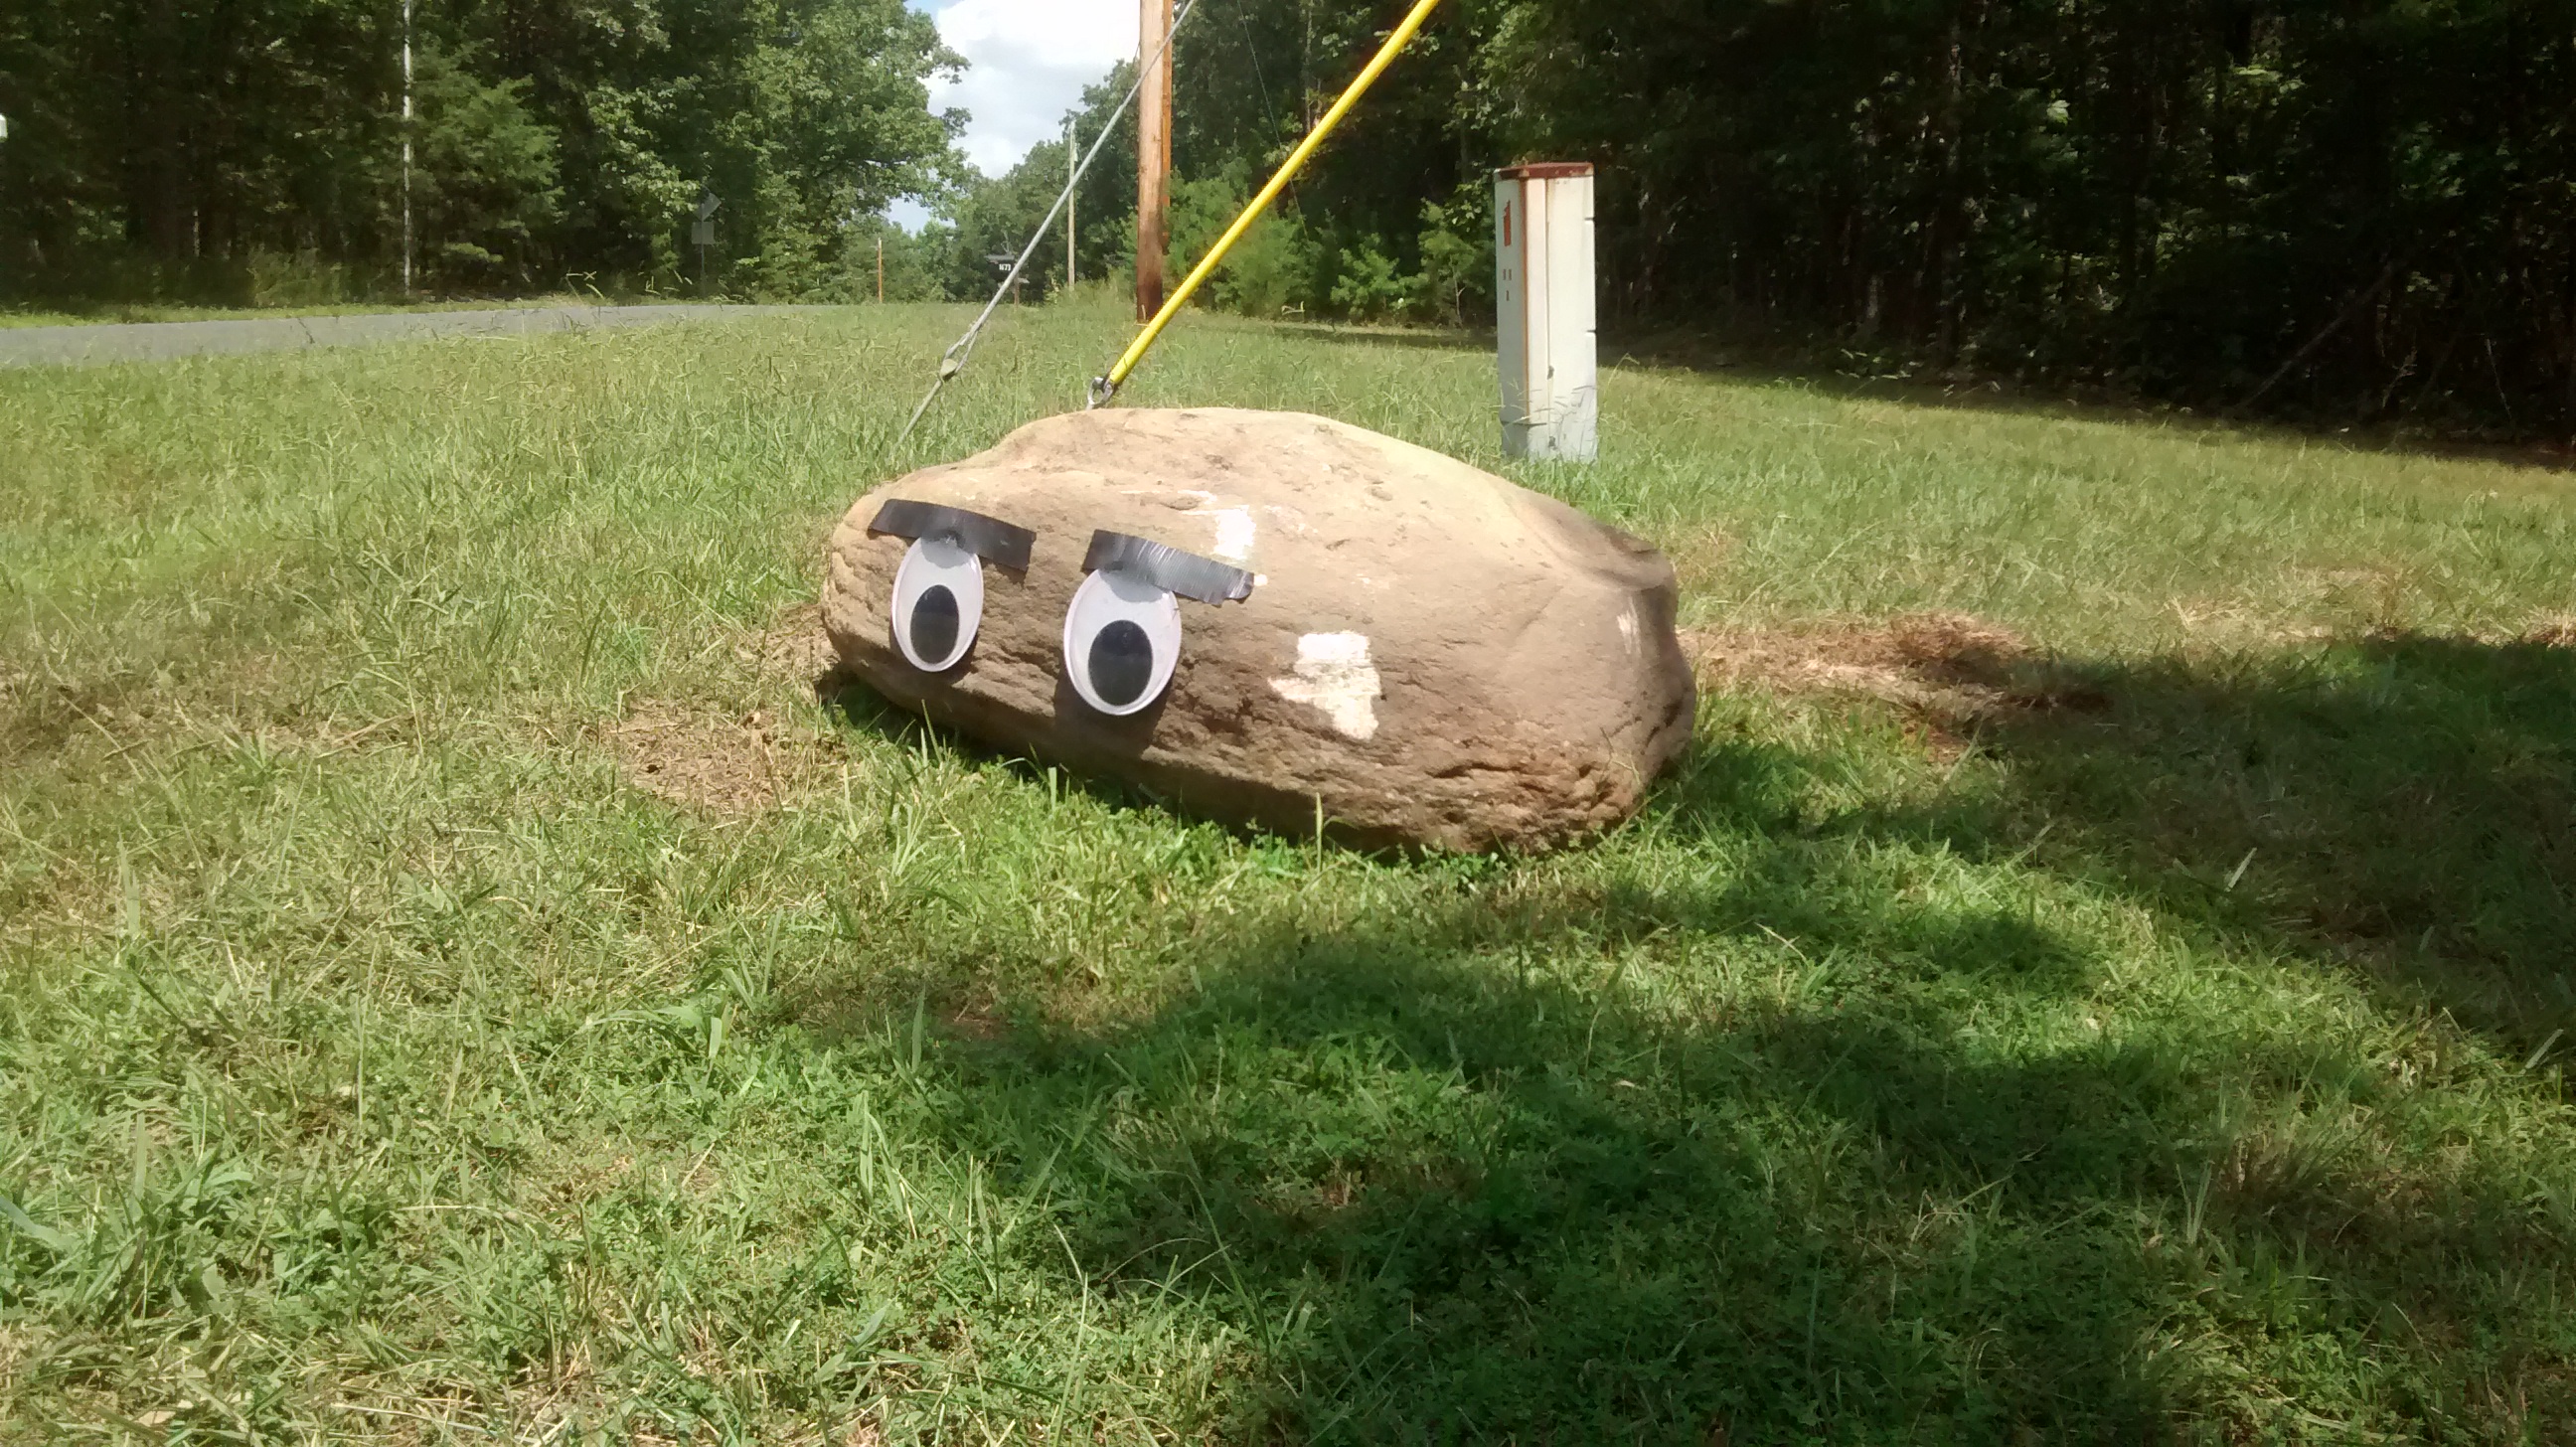 Nothing to see here just an angry rock with giant googly eyes and